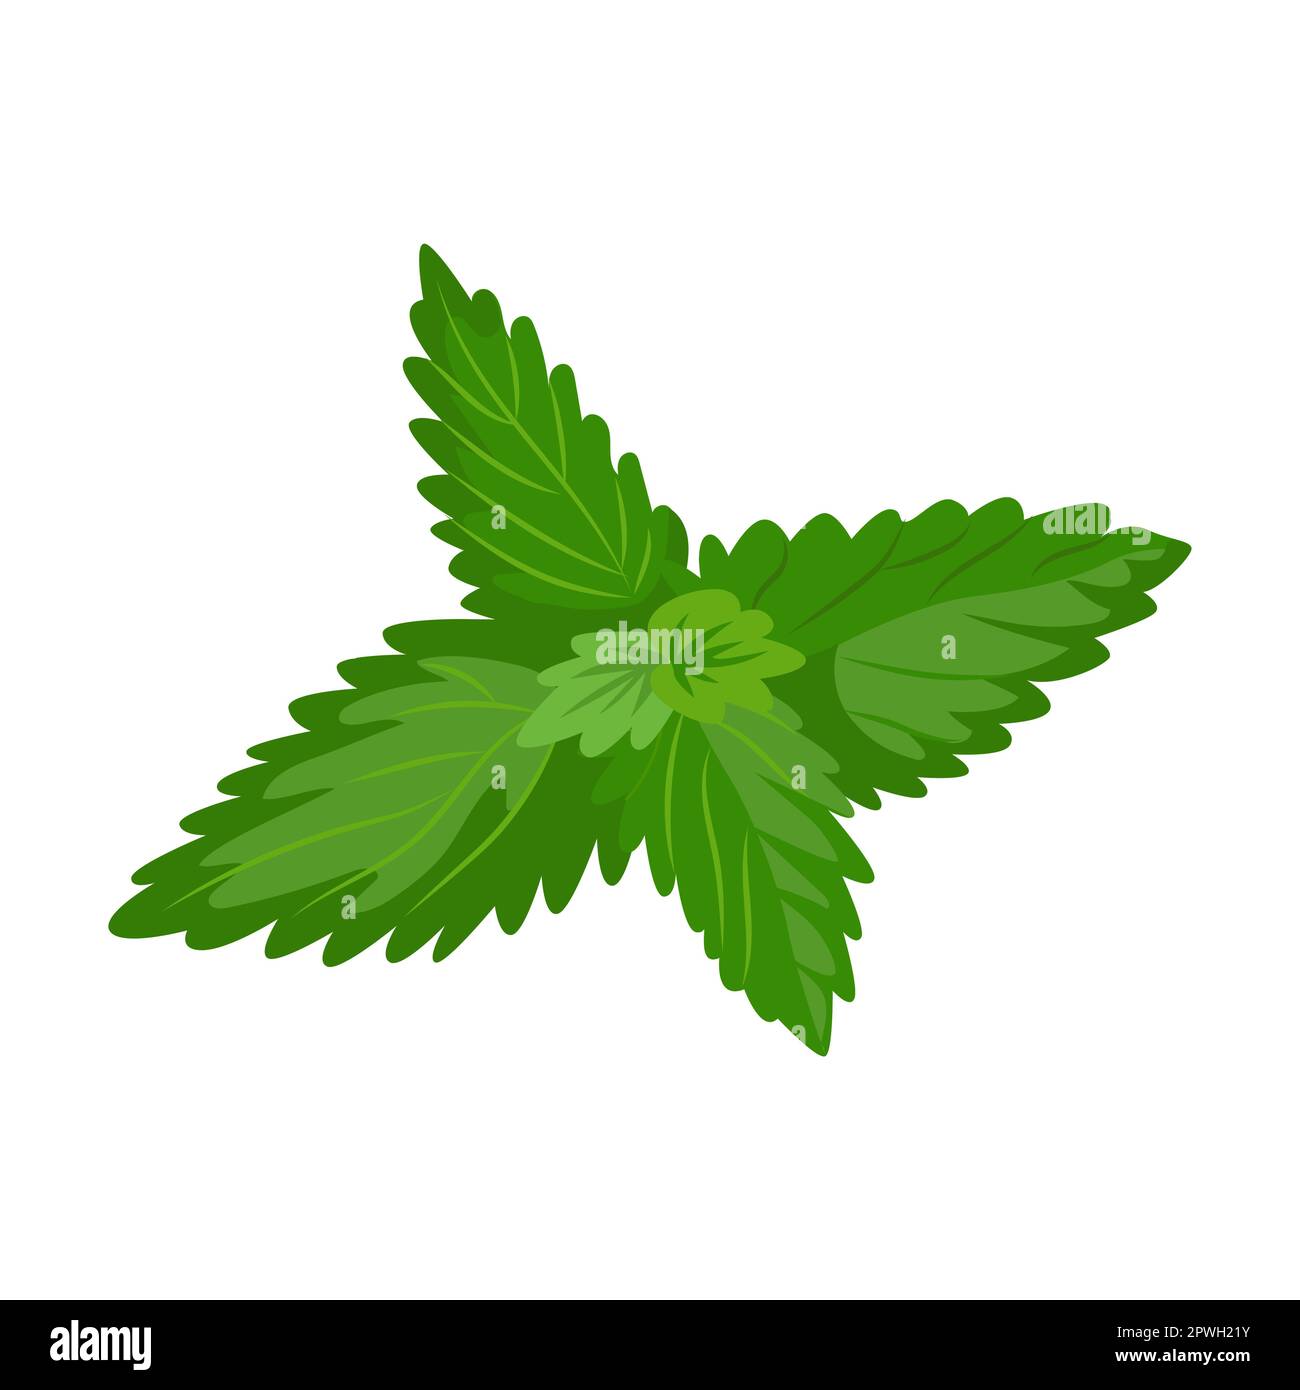 Mint herb and leaves vector illustration. Spicy herbal plants, parsley, rosemary, coriander, oregano, mint on white background Stock Vector